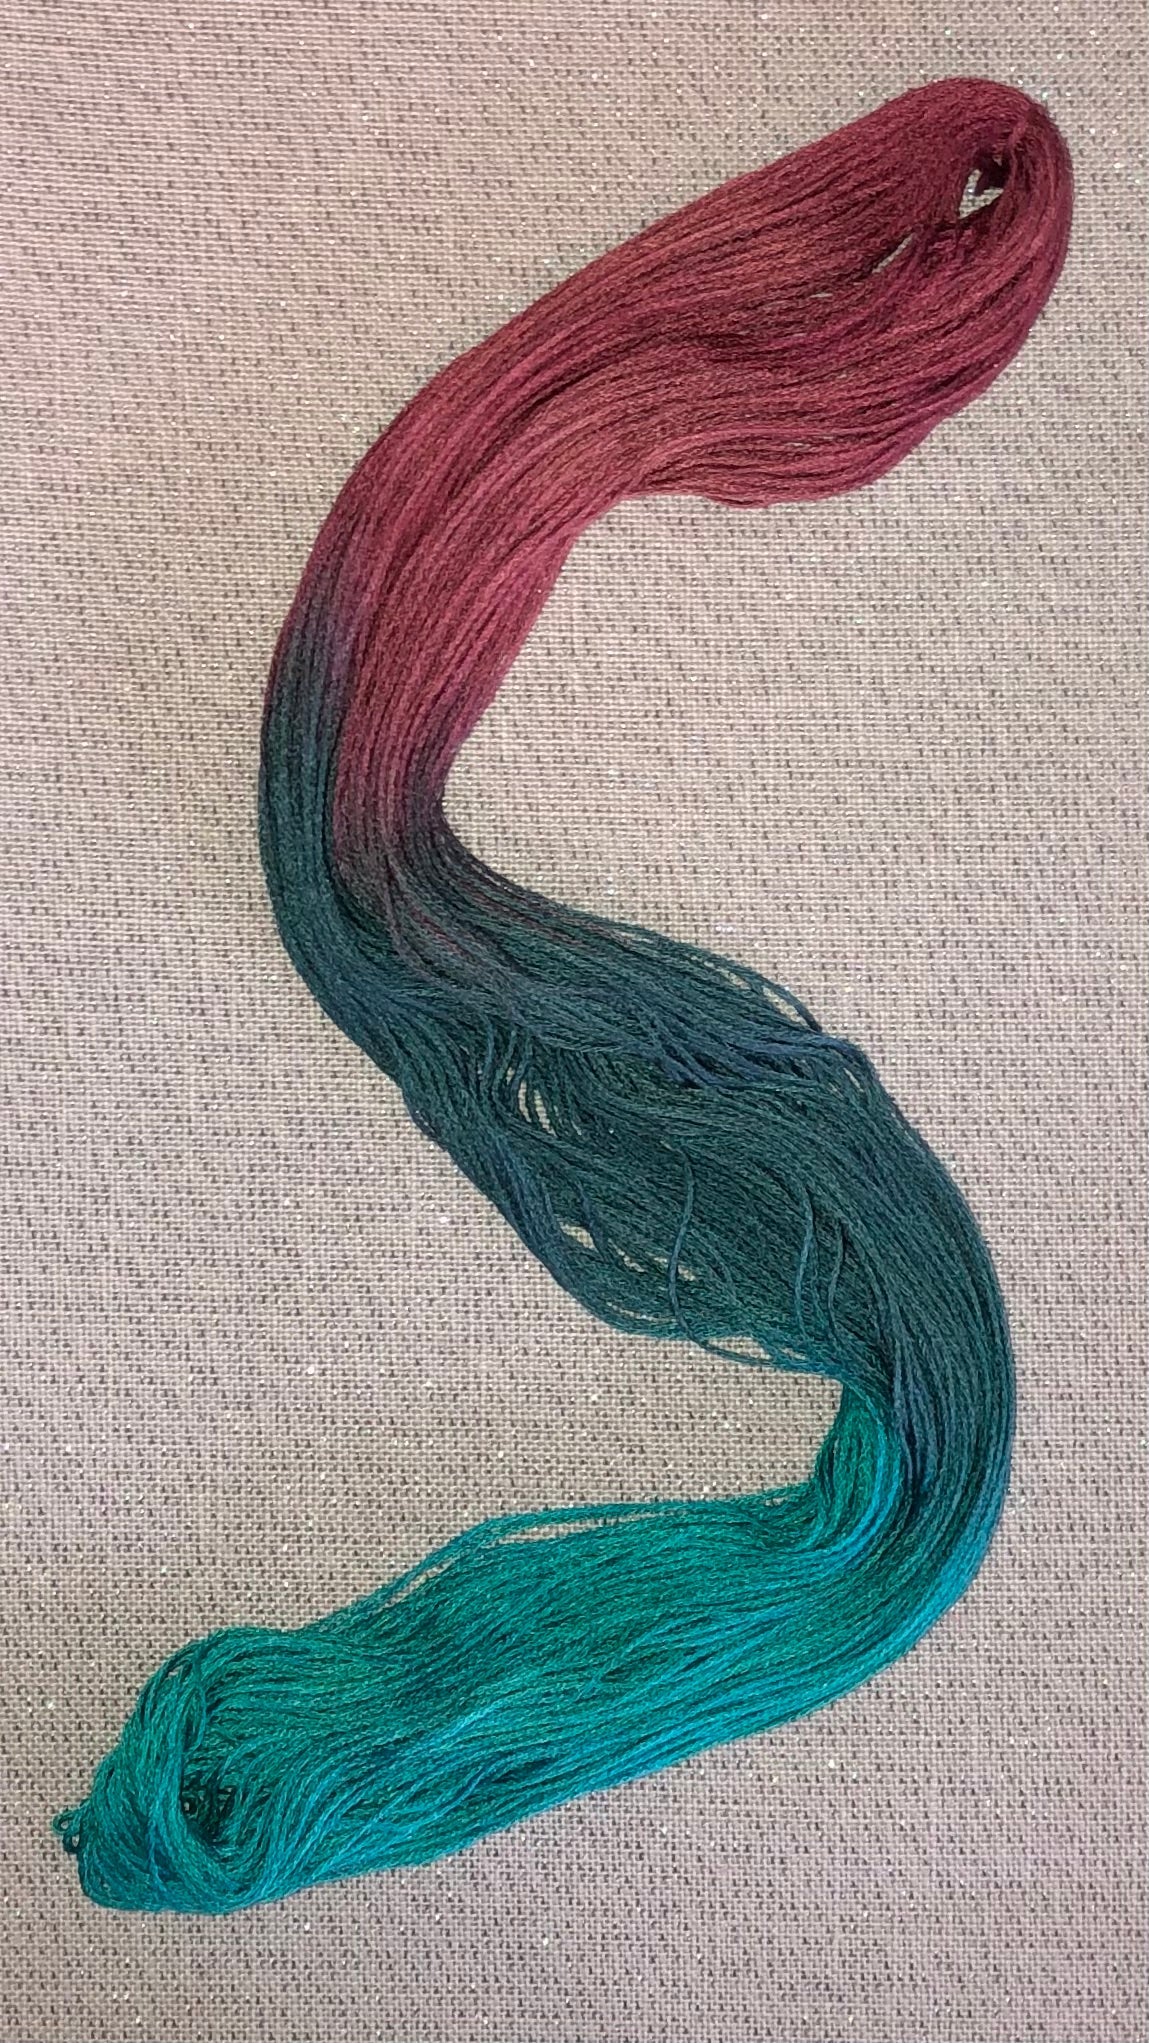 Silk hand dyed floss - Hysteria - Dyeing for Cross Stitch